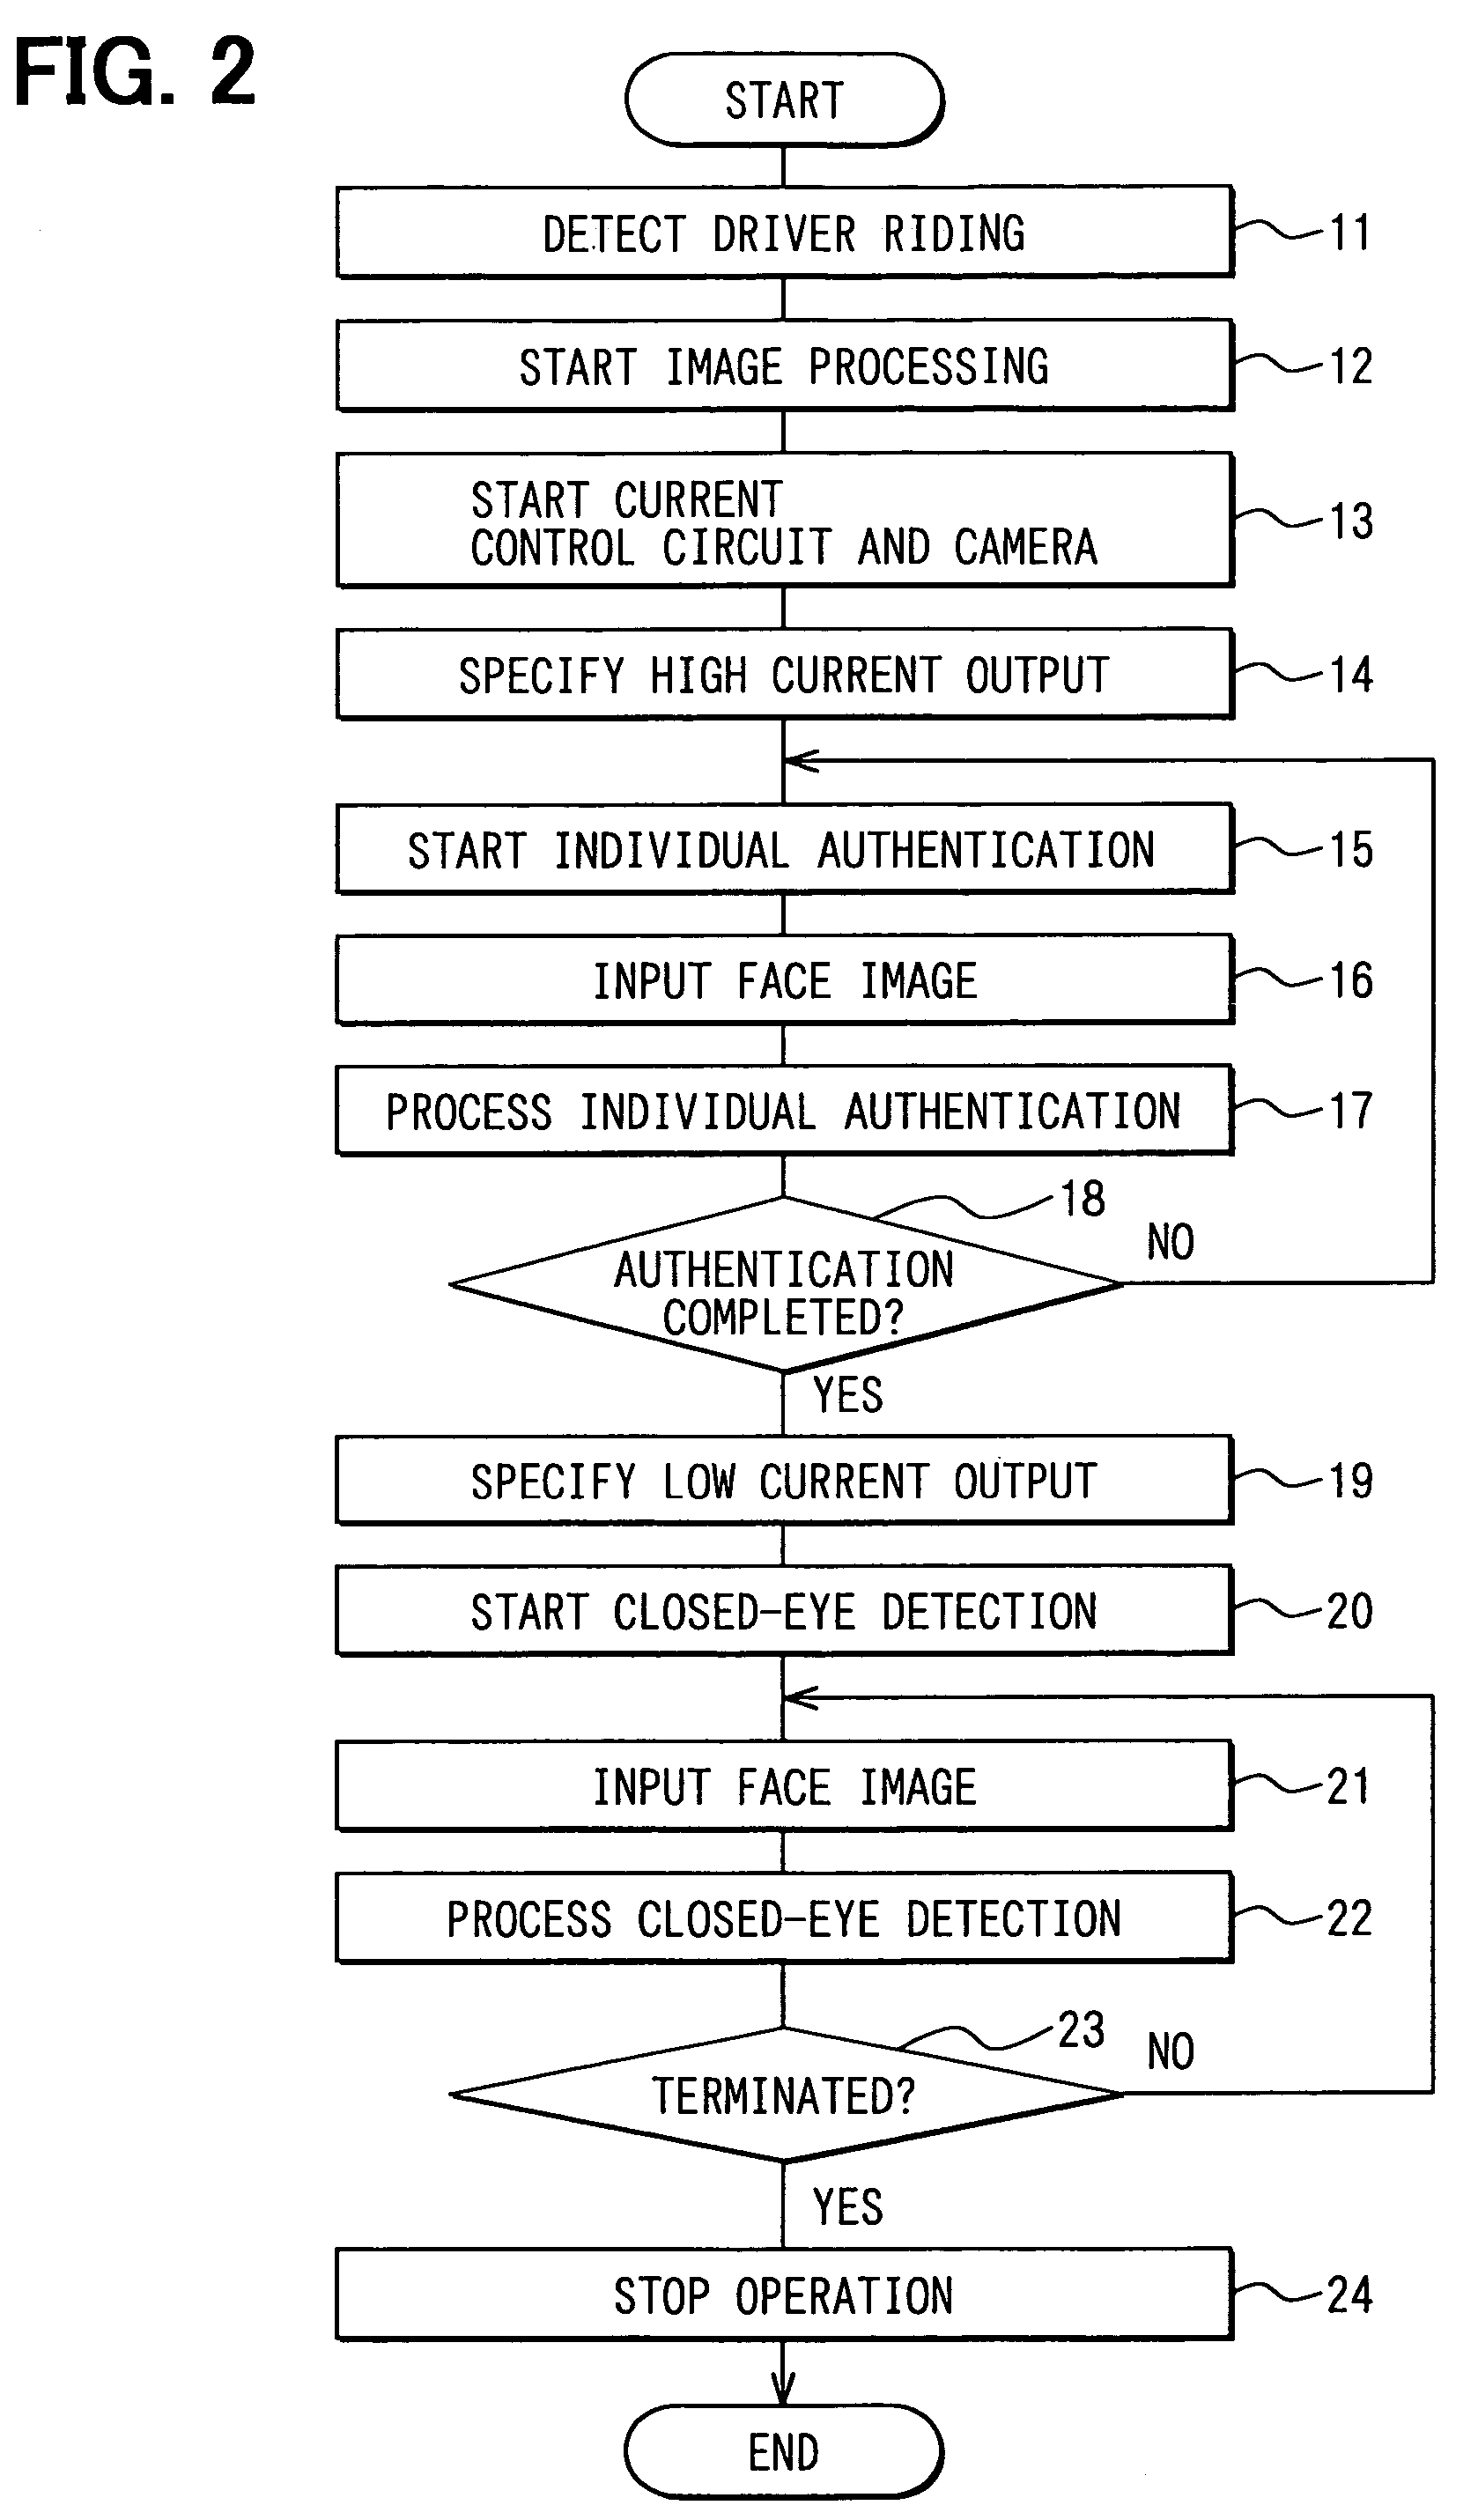 Driver's appearance recognition system